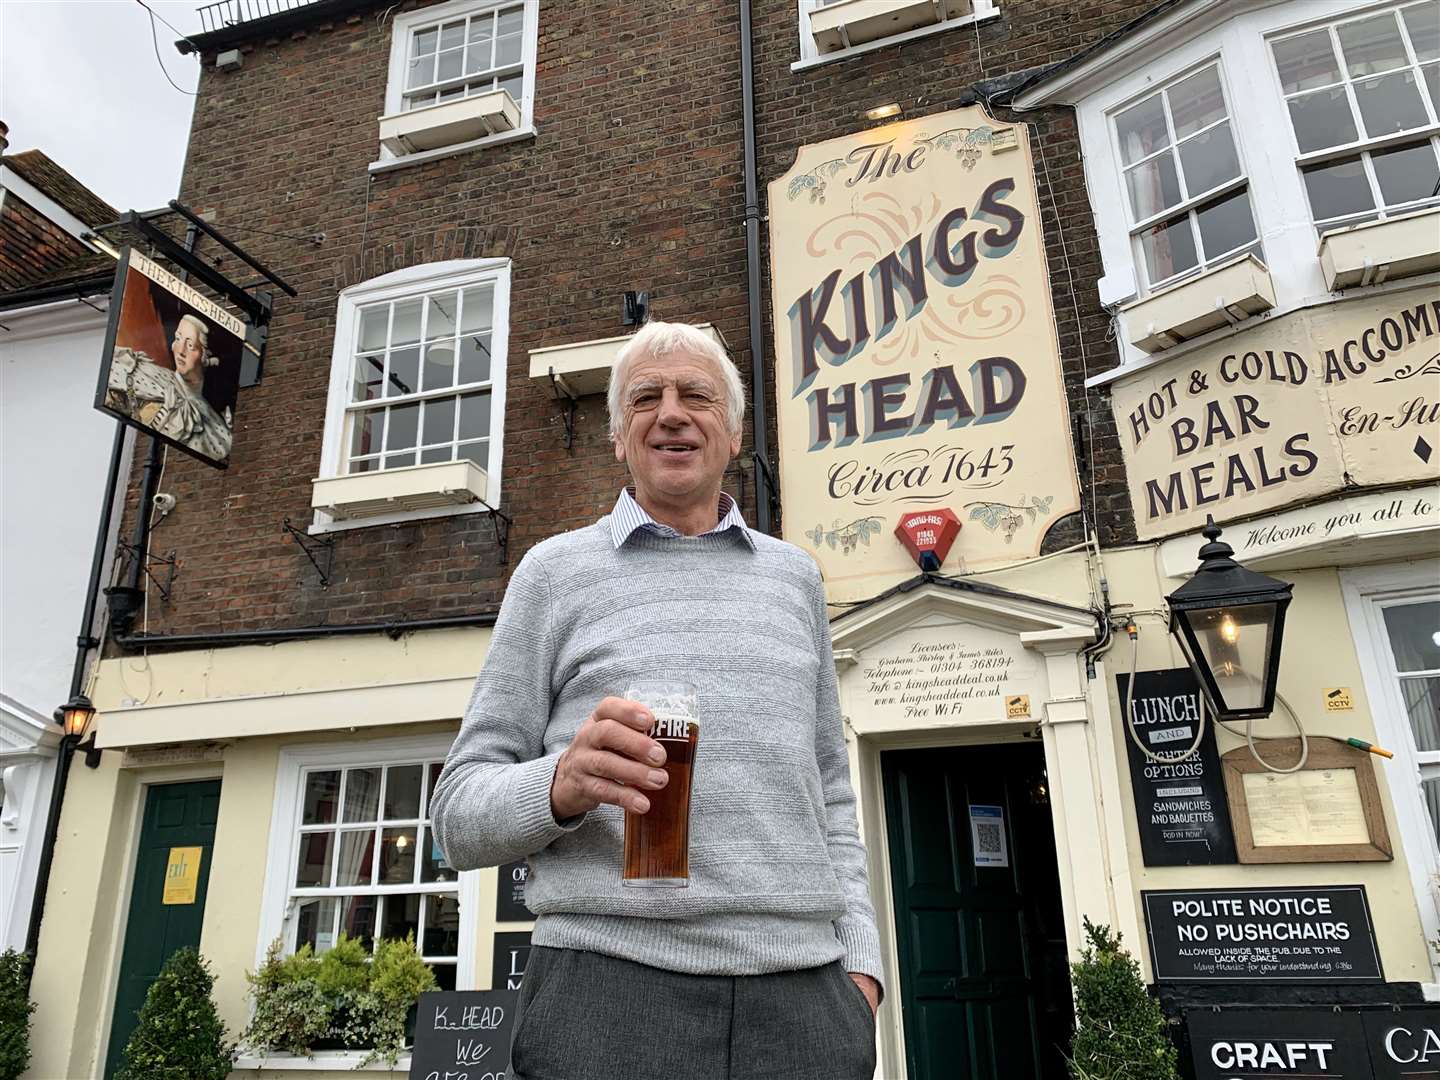 Landlord Graham Stiles, 69, says his 40th year of pulling pints has been the most challenging yet